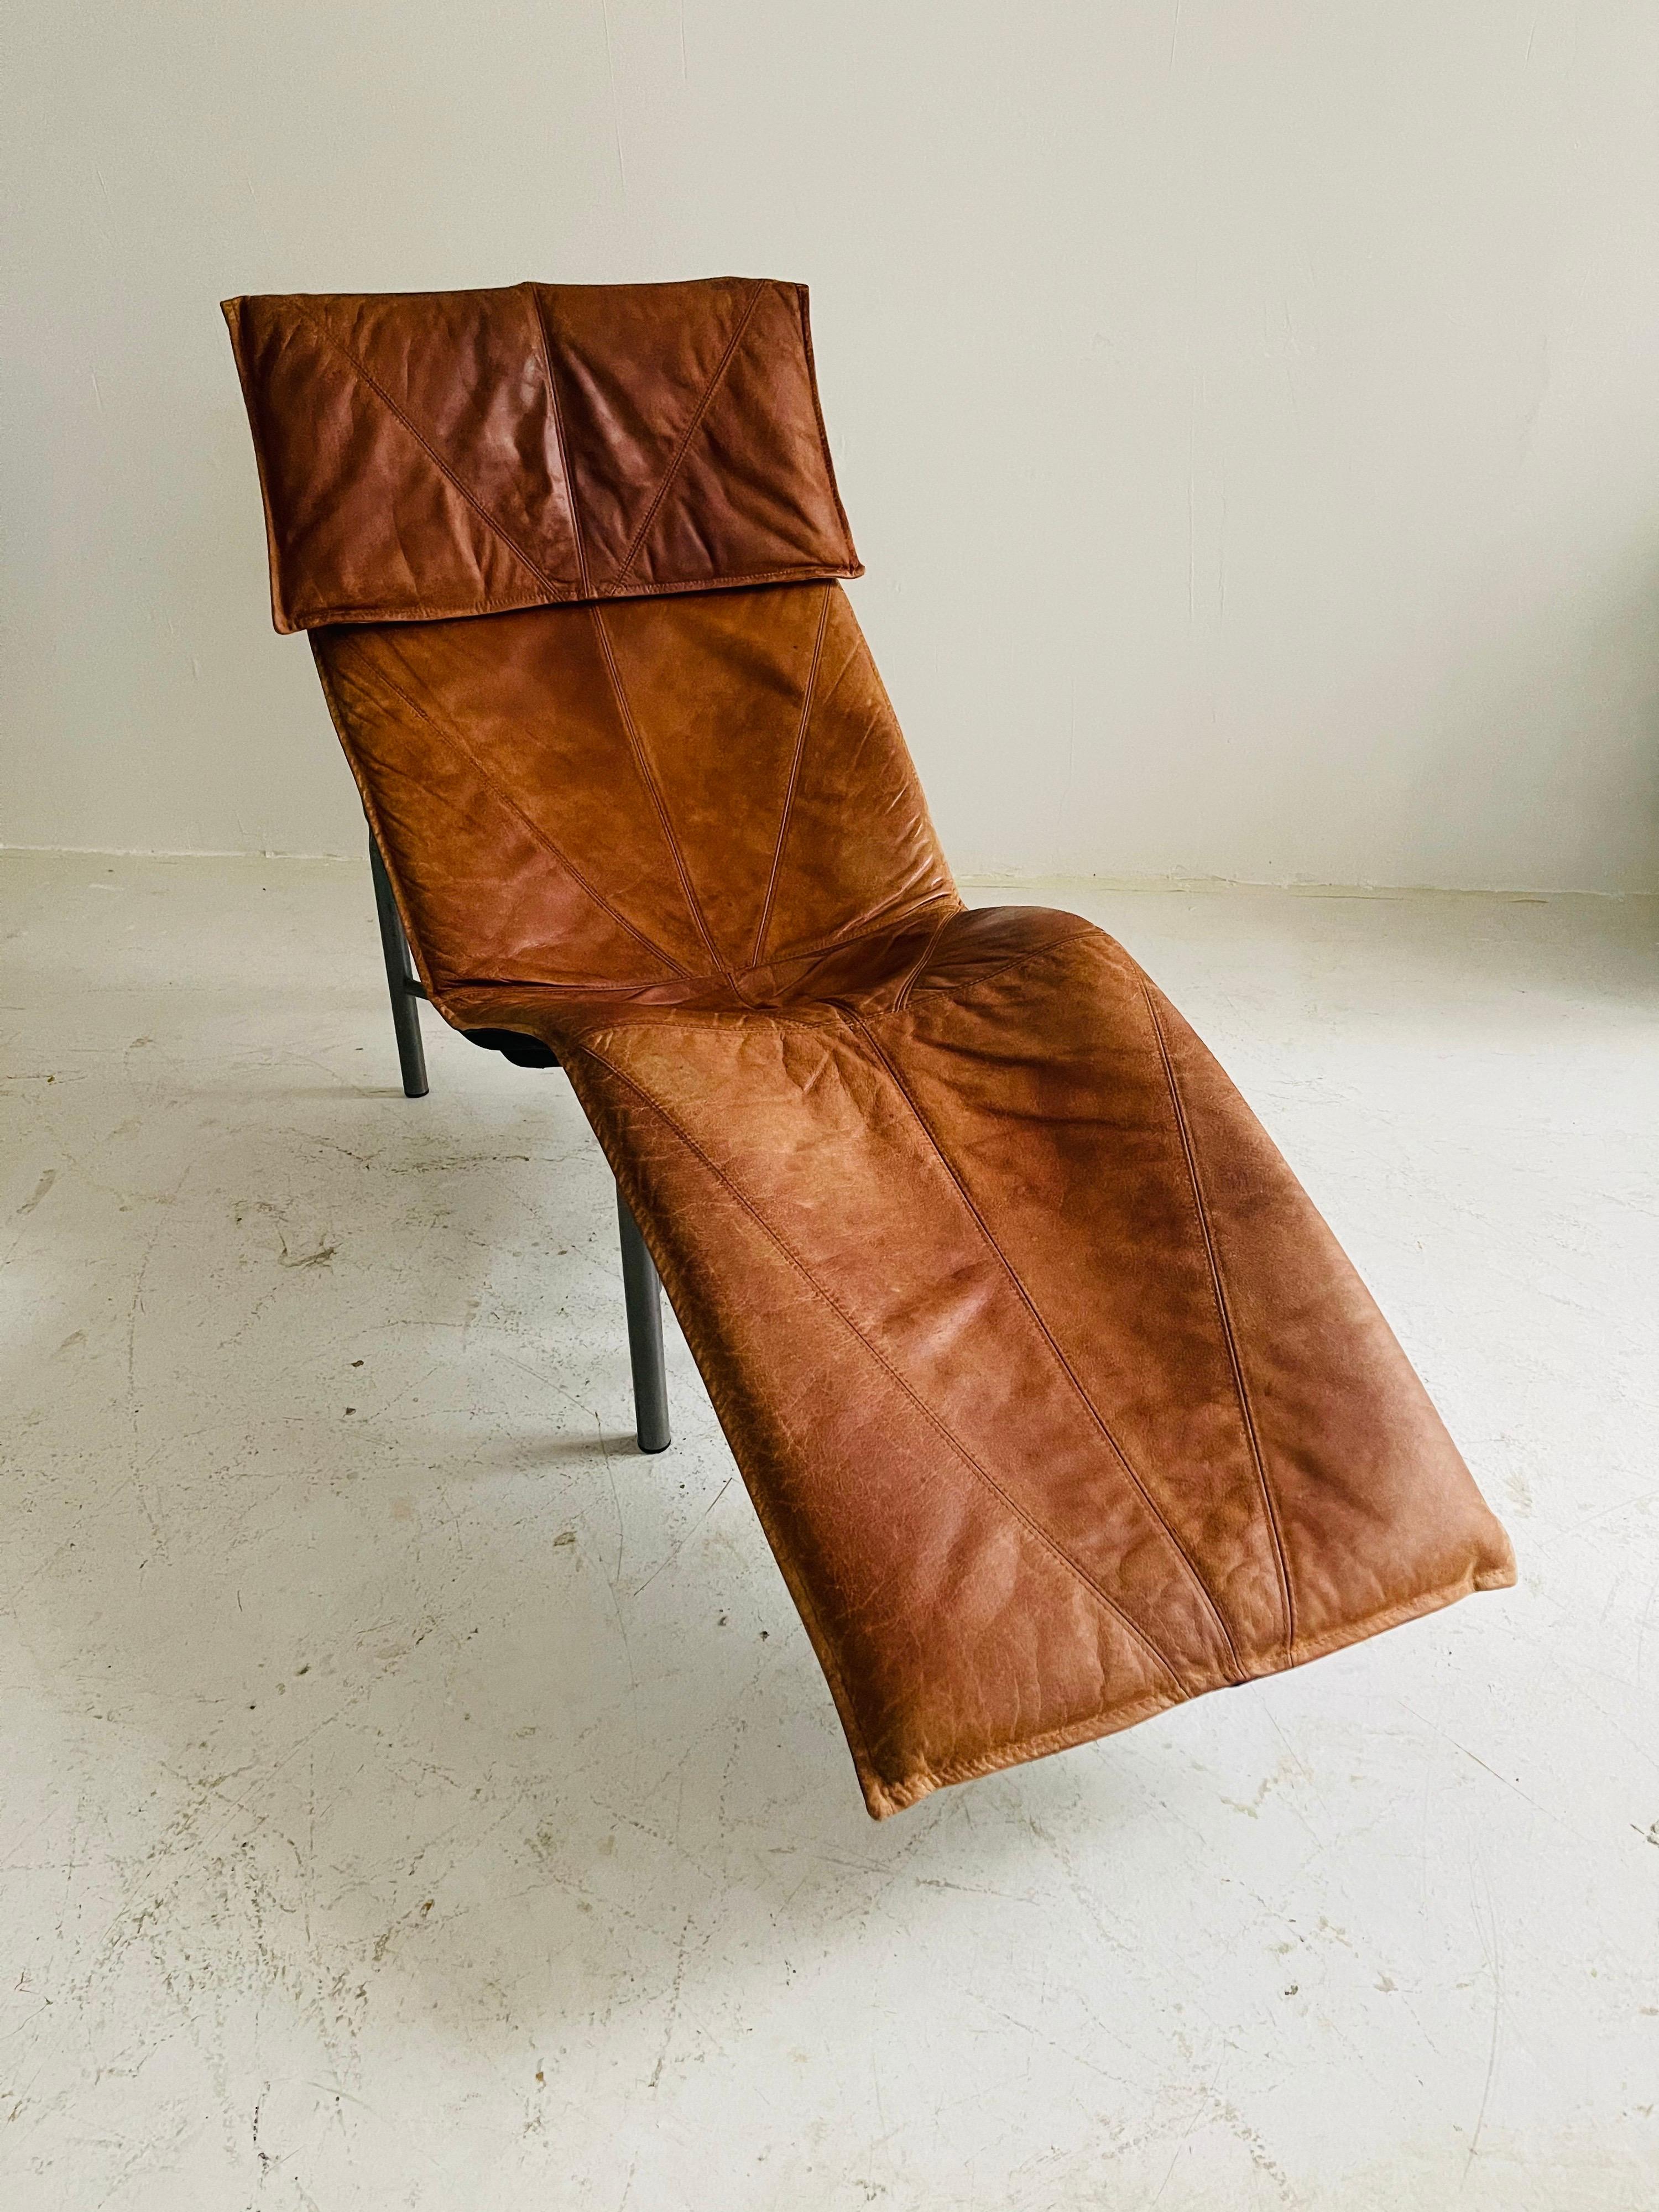 Patinated Cognac Leather Chaise Longue by Tord Bjorklund, Sweden, 1970 For Sale 11